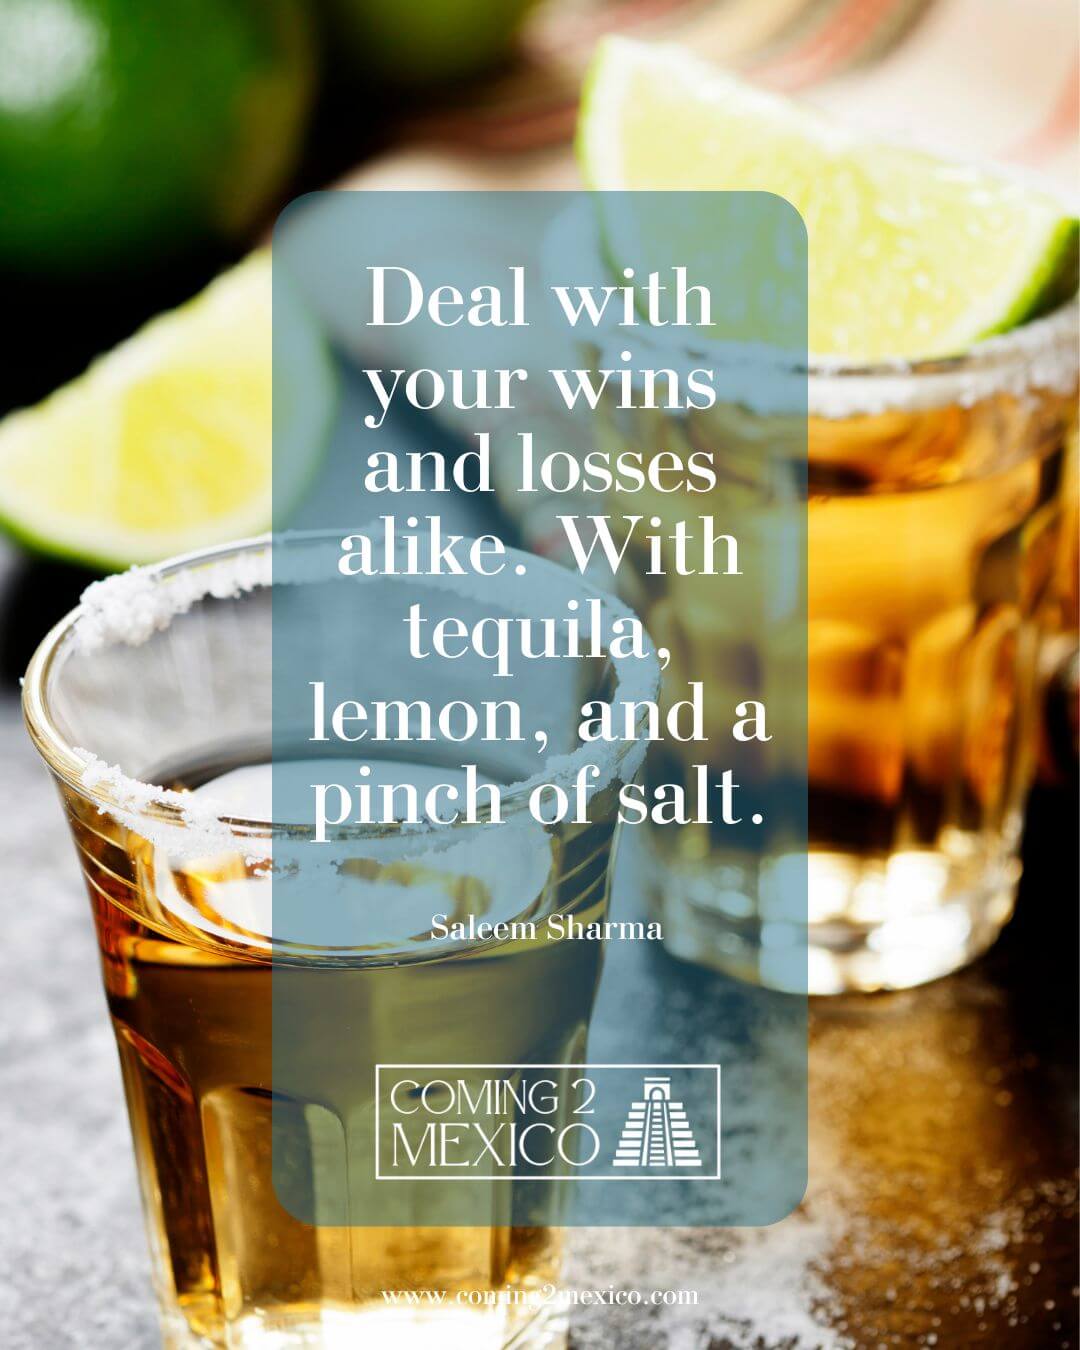 “Deal with your wins and losses alike. With tequila, lemon, and a pinch of salt.“ - Saleem Sharma